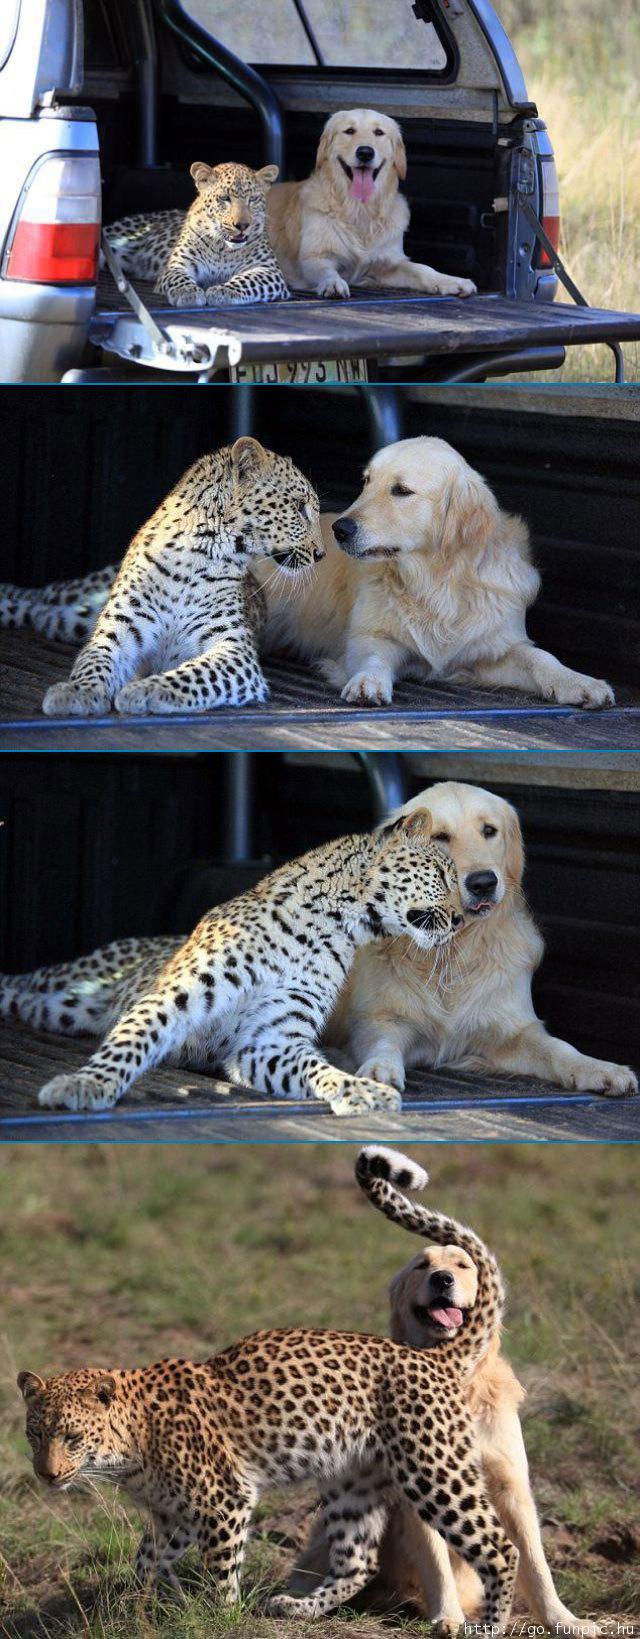 Best Friends Cheetah and Labrador Dog Pictures